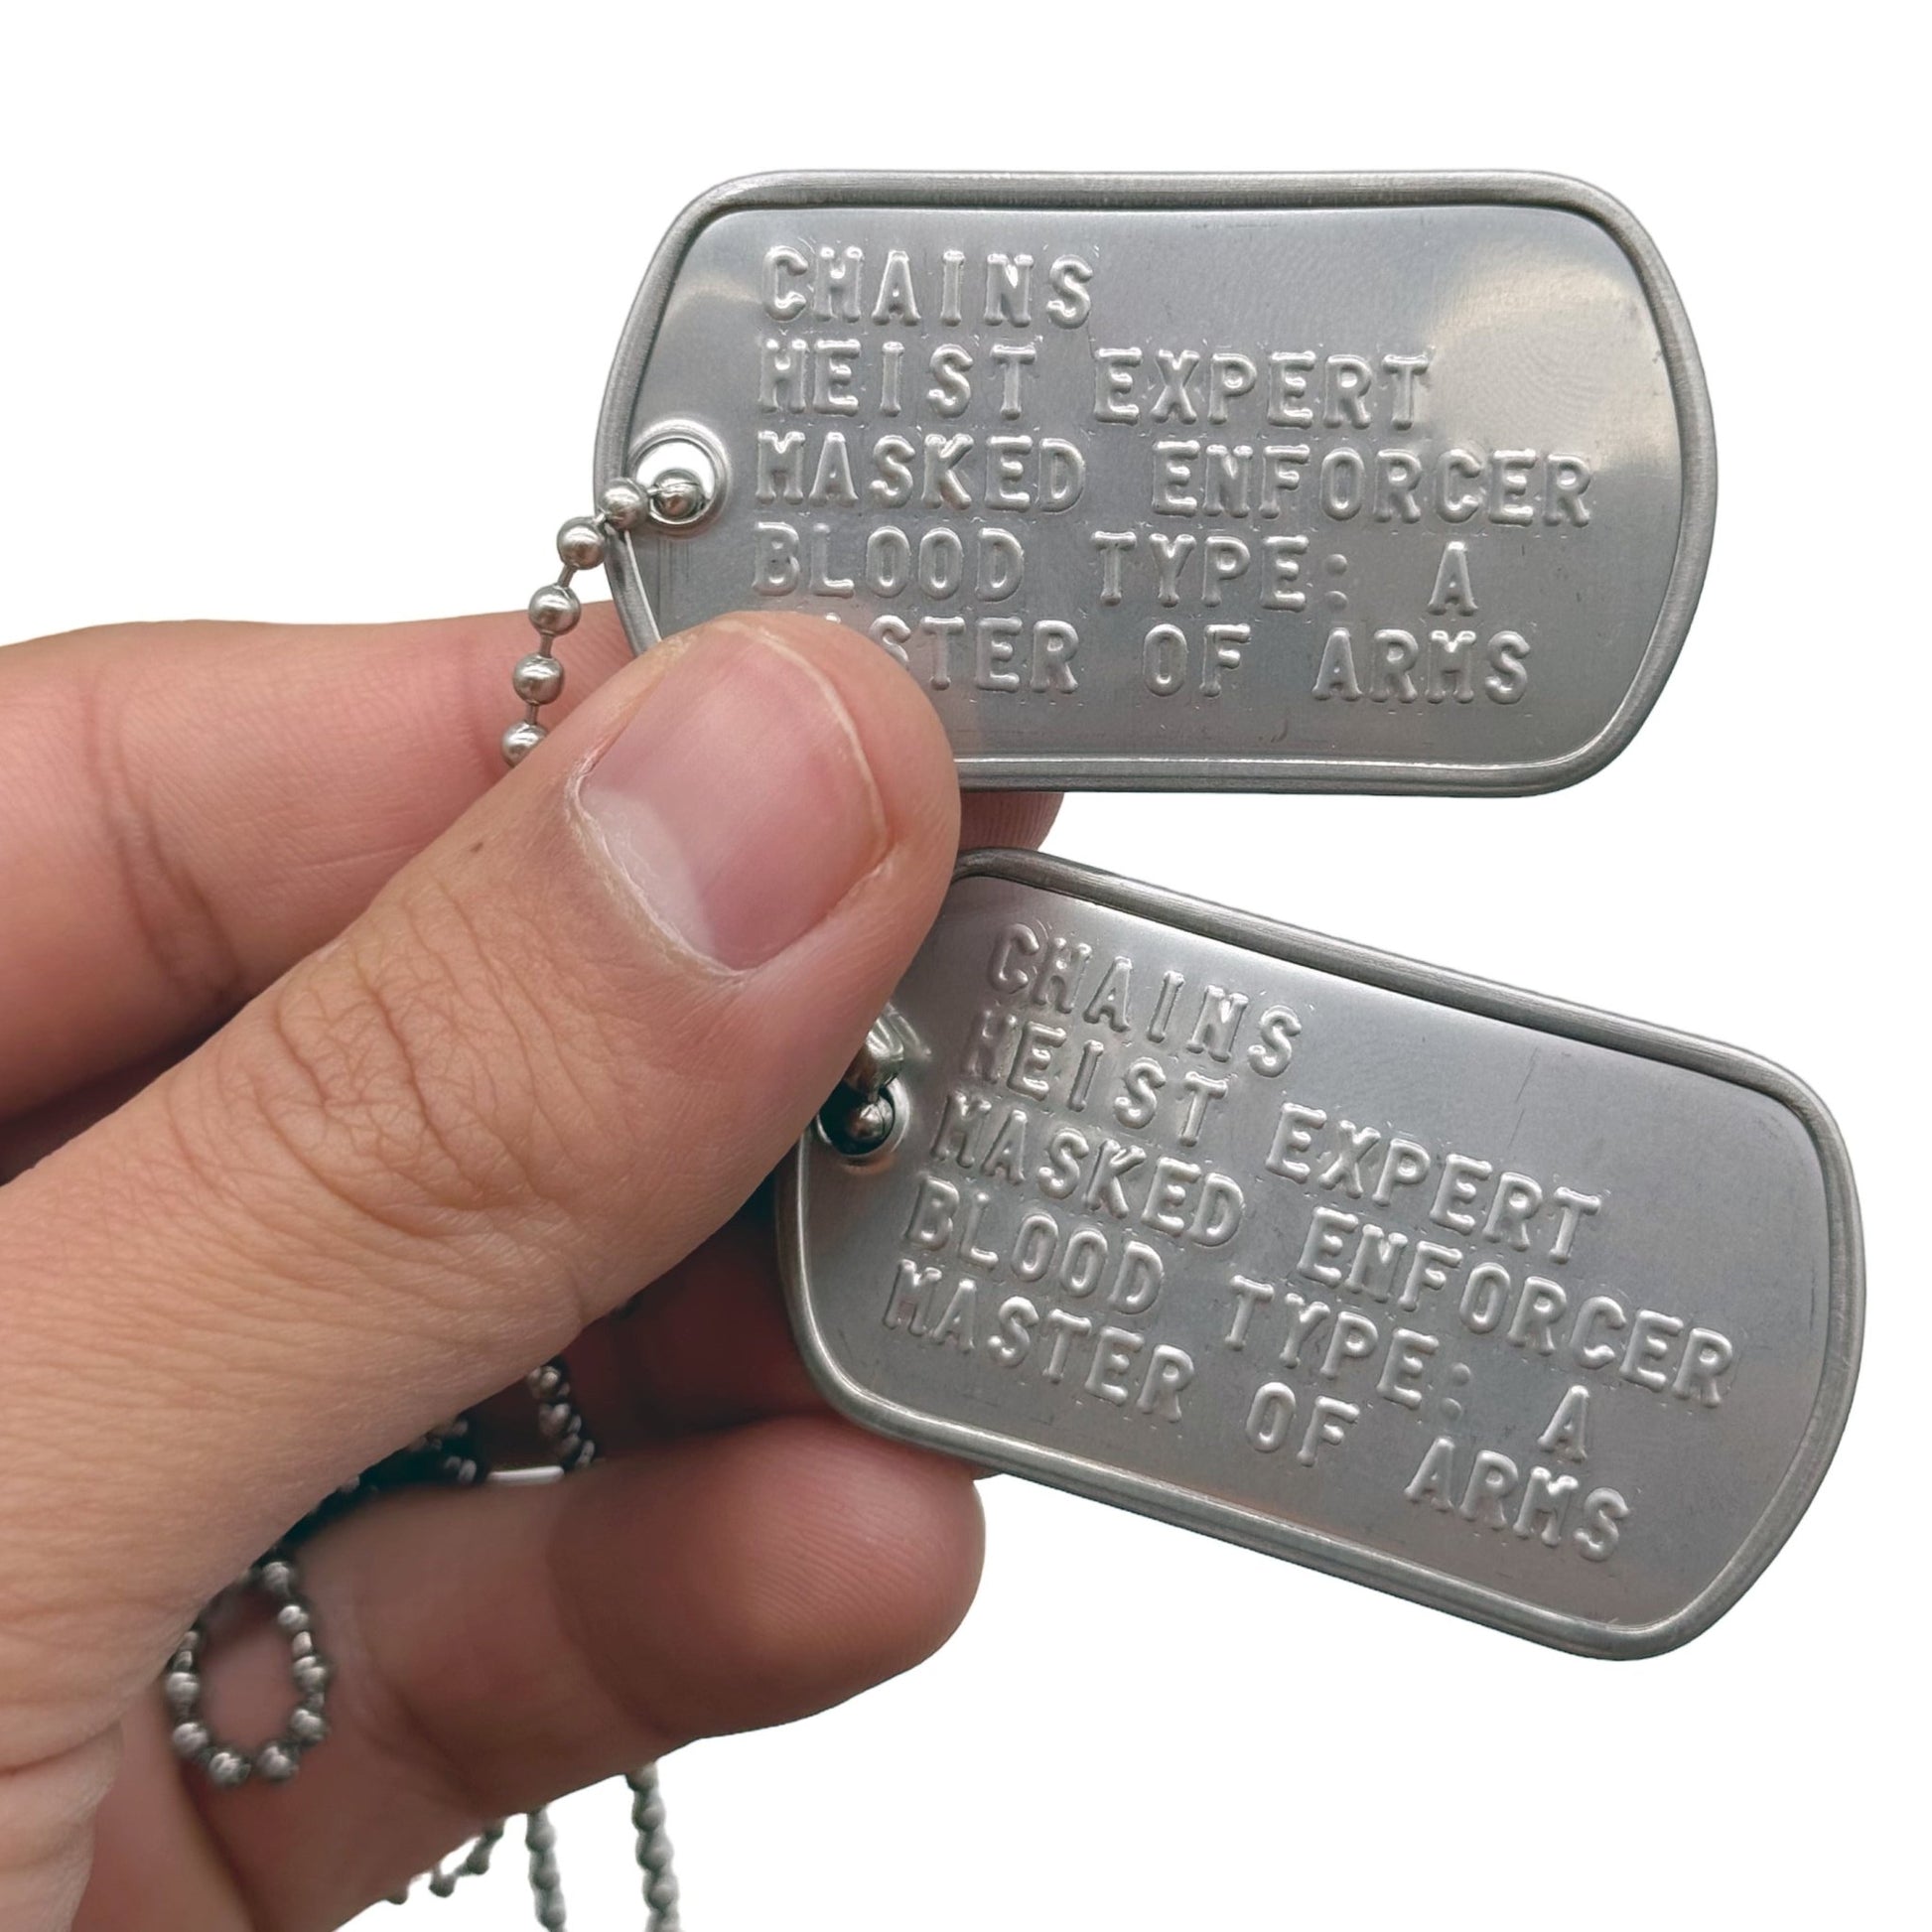 'CHAINS' Inspired US Military DOG TAGS- Collector's Pendant Necklace Cosplay Prop - TheDogTagCo